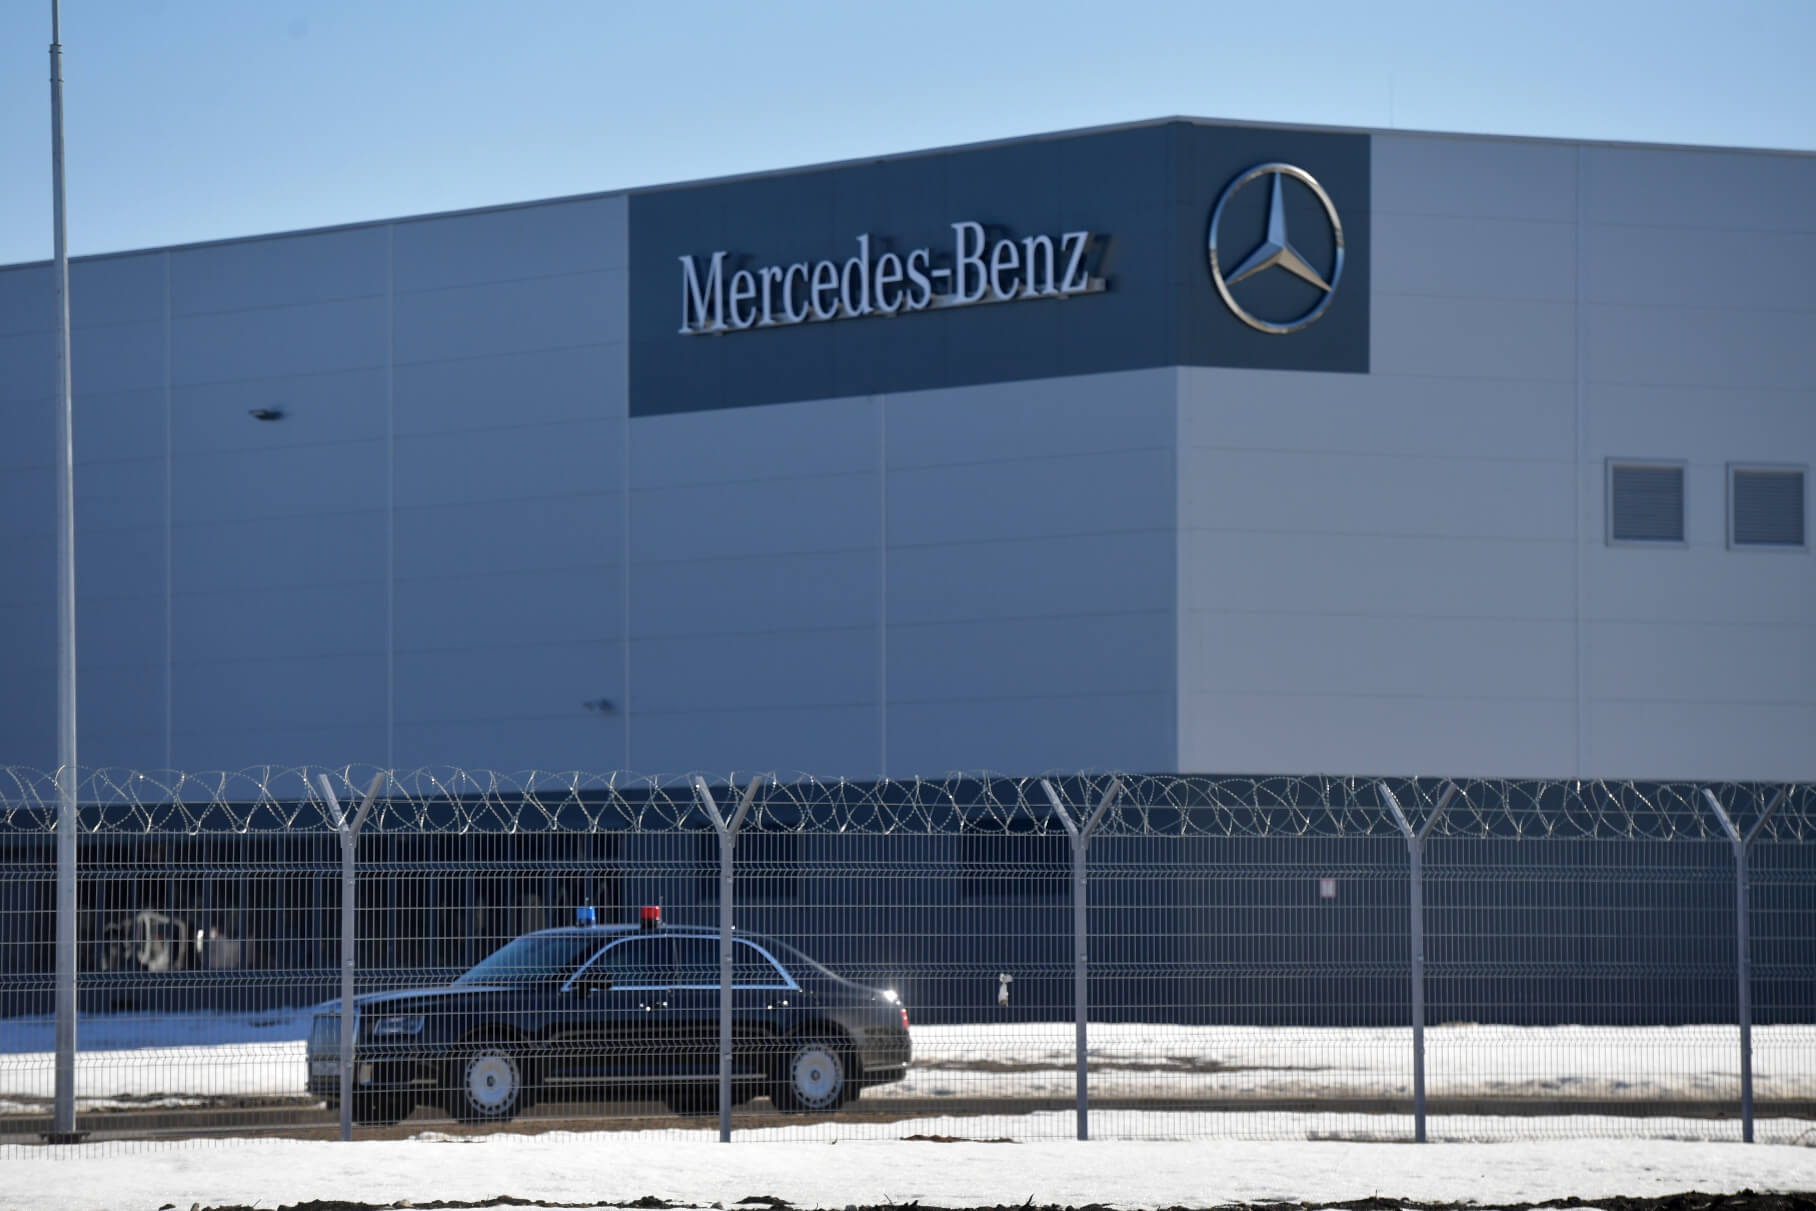 The former Mercedes-Benz plant near Moscow will be relaunched with a new brand